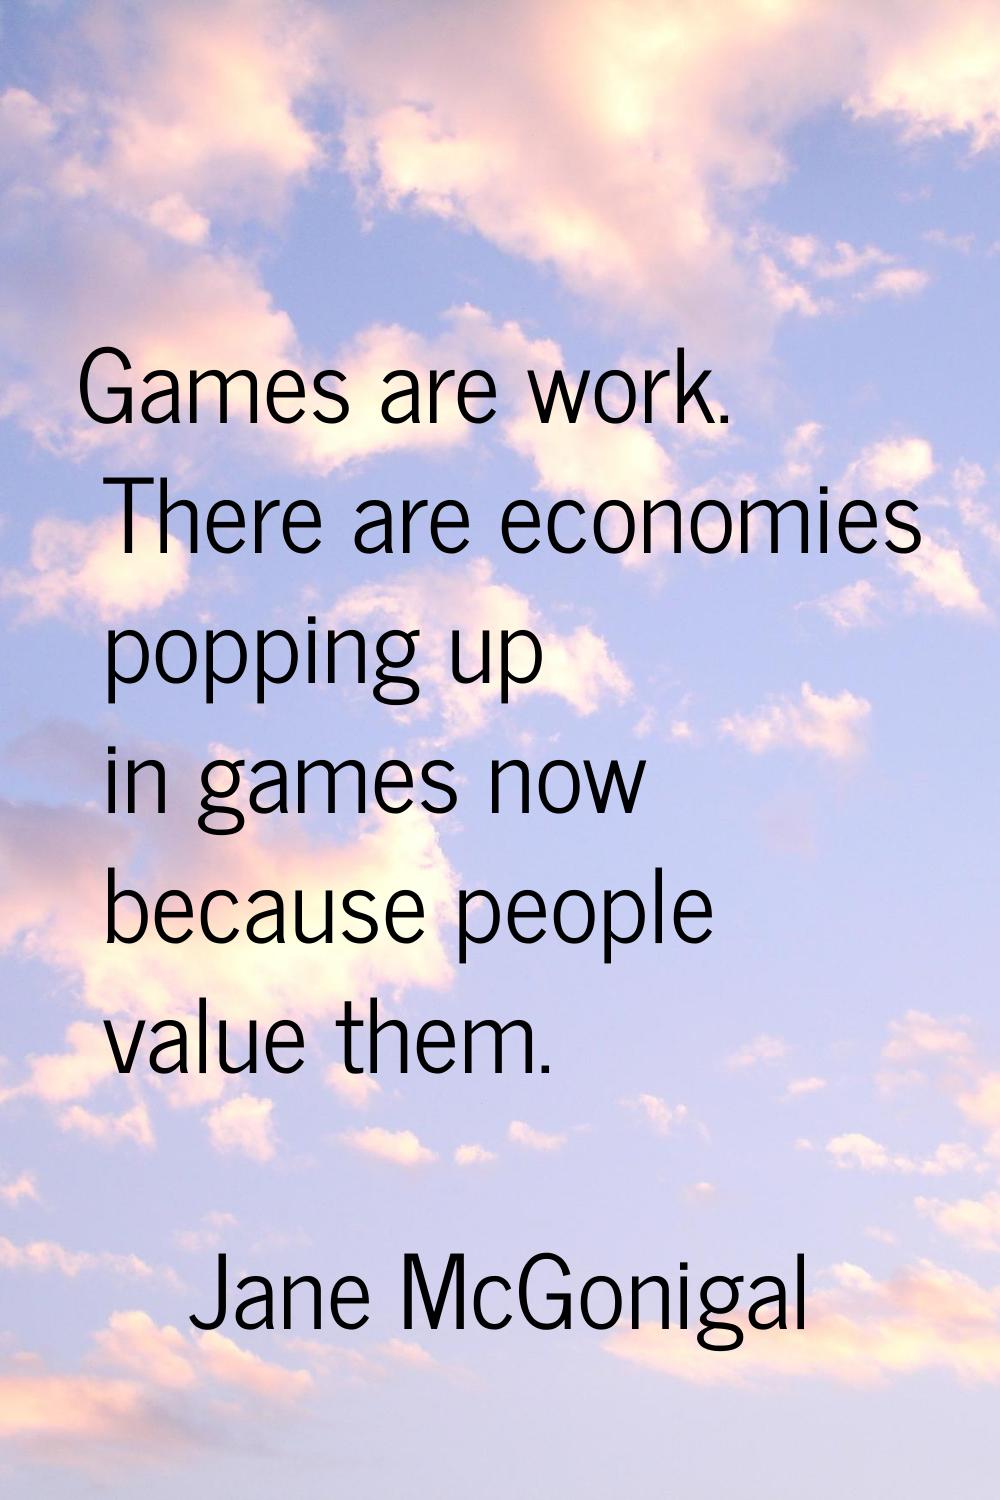 Games are work. There are economies popping up in games now because people value them.